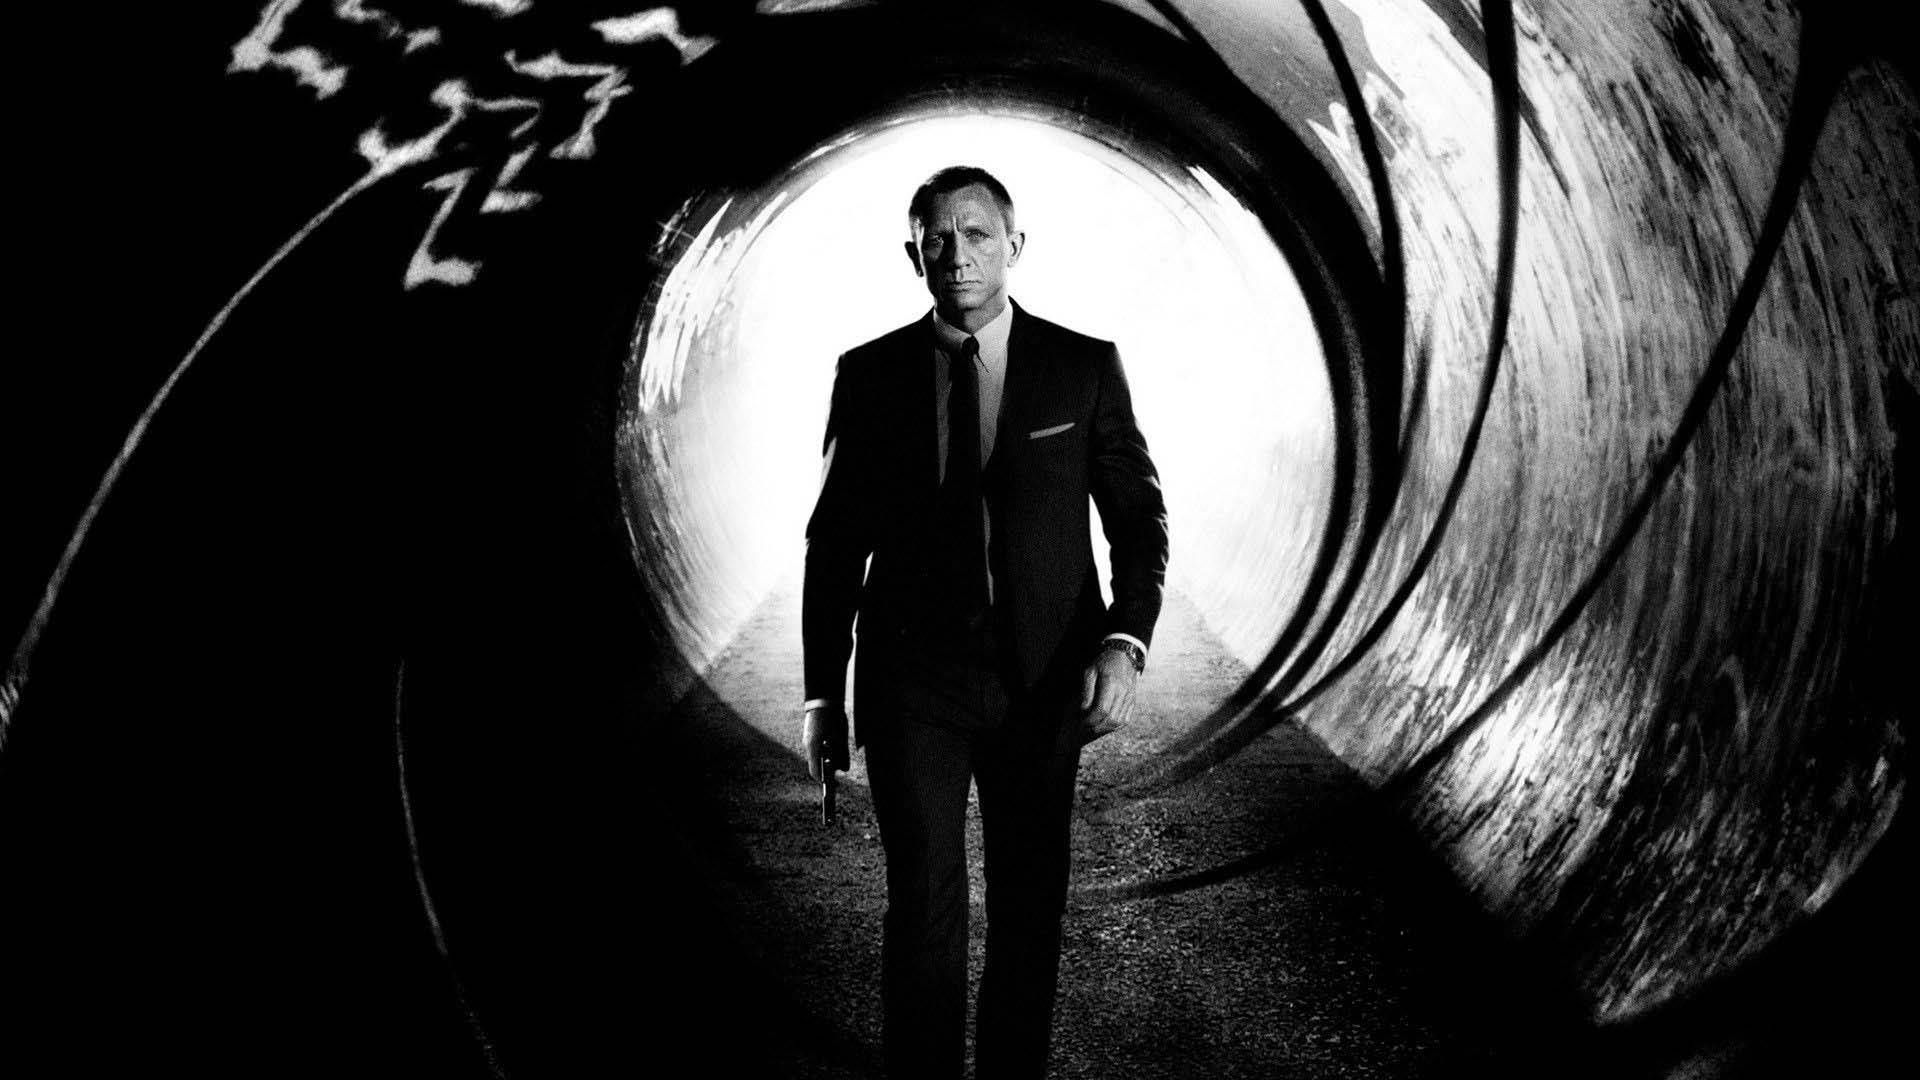 James Bond, played by Daniel Craig, walkign down a gun barrel in the opening sequence of 'No Time to Die'